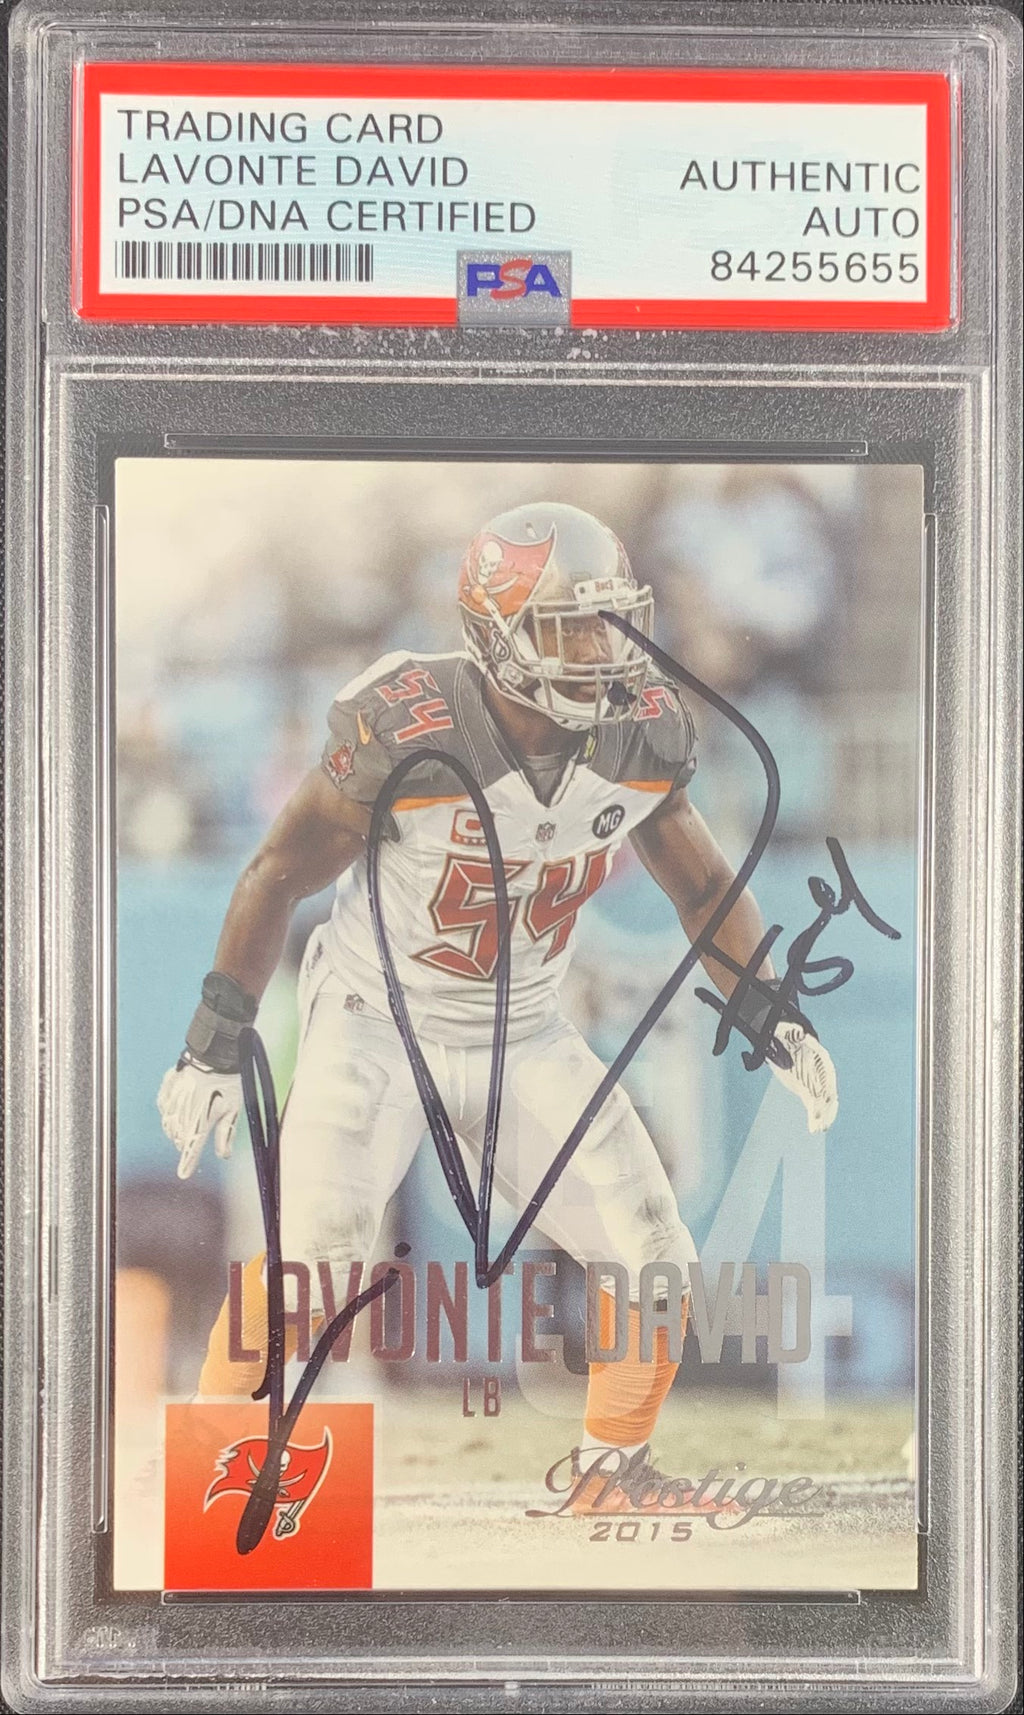 Lavonte David autograph signed Panini card Tampa Bay Buccaneers PSA Encapsulated - JAG Sports Marketing